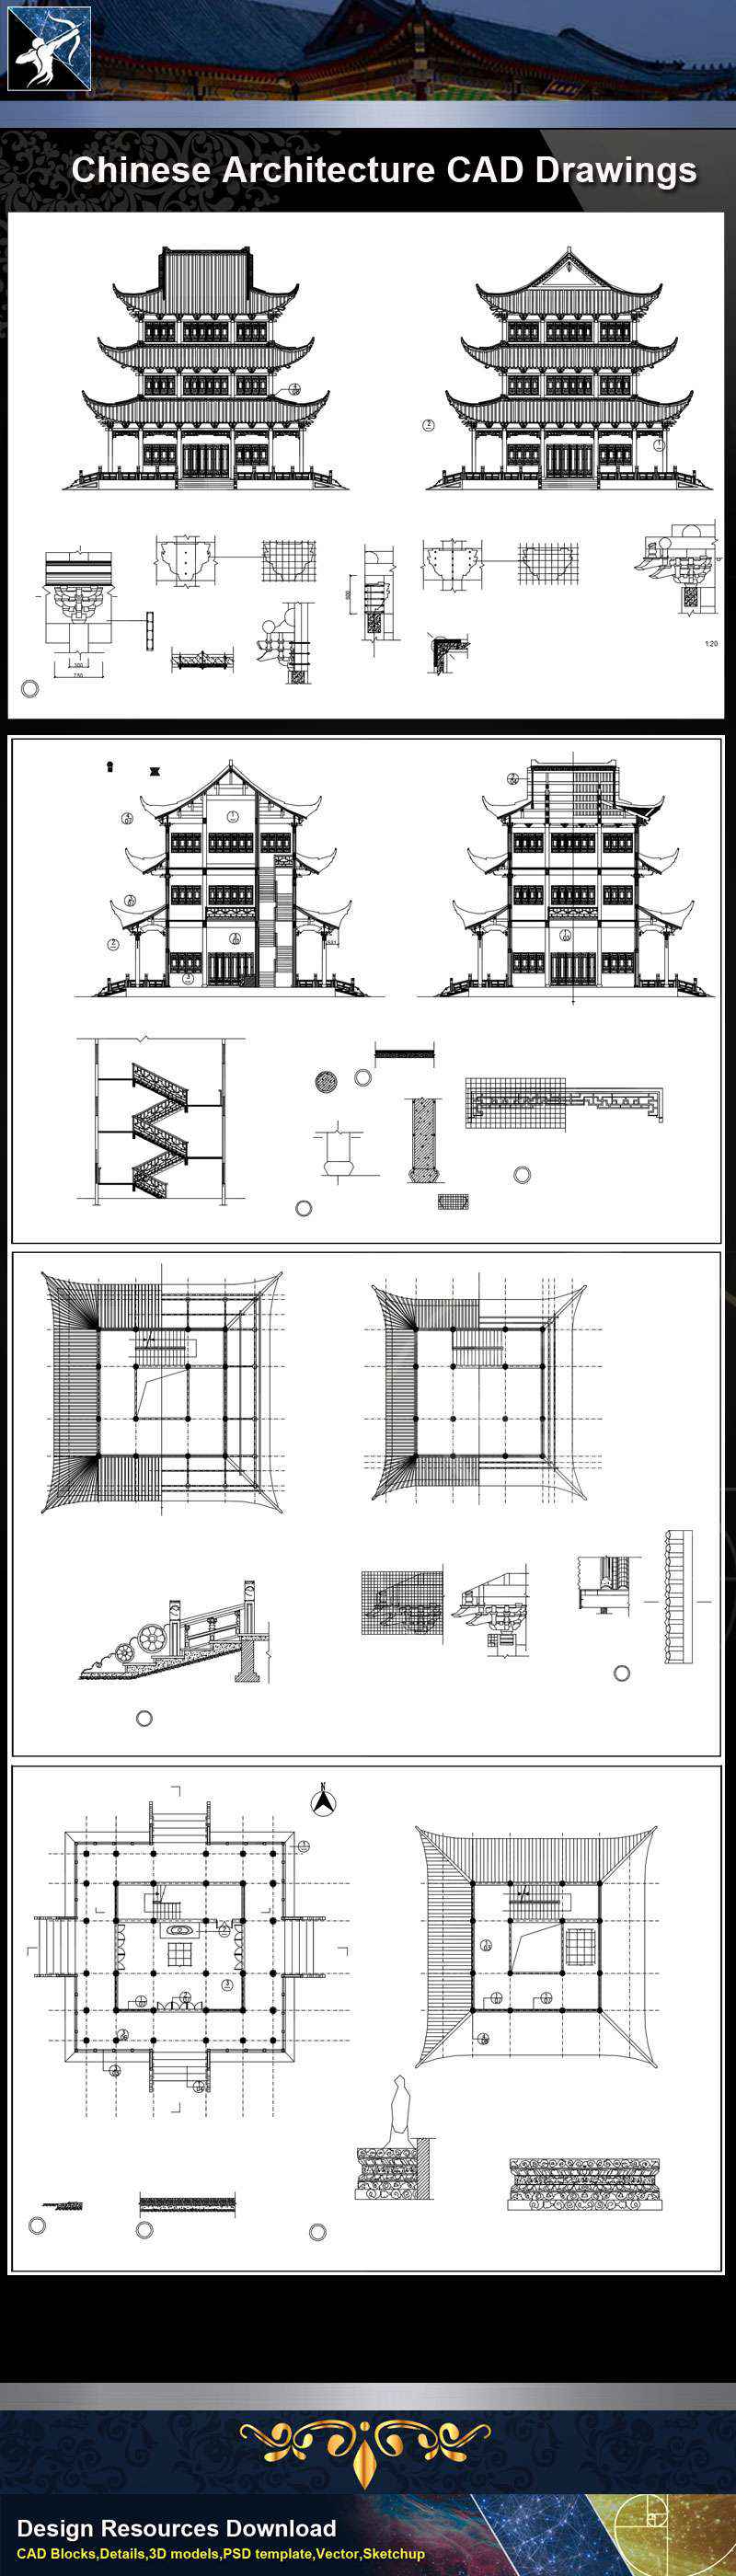 ★【Chinese Architecture CAD Drawings】@Chinese Temple Drawings,CAD Details,Elevation V.2